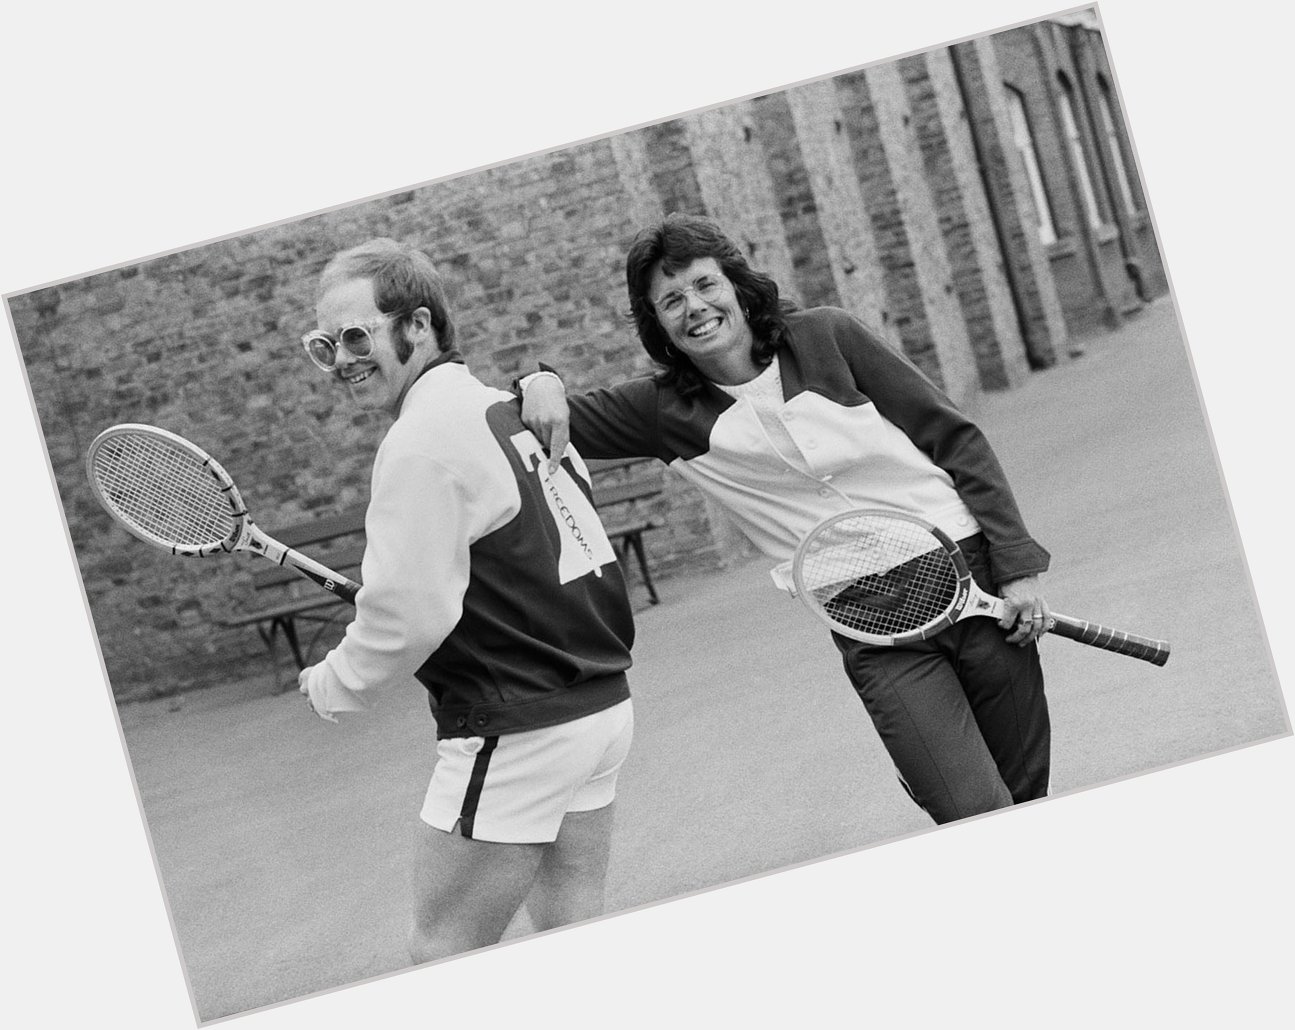 Happy Birthday Billie Jean King! Here she is with Elton John. 